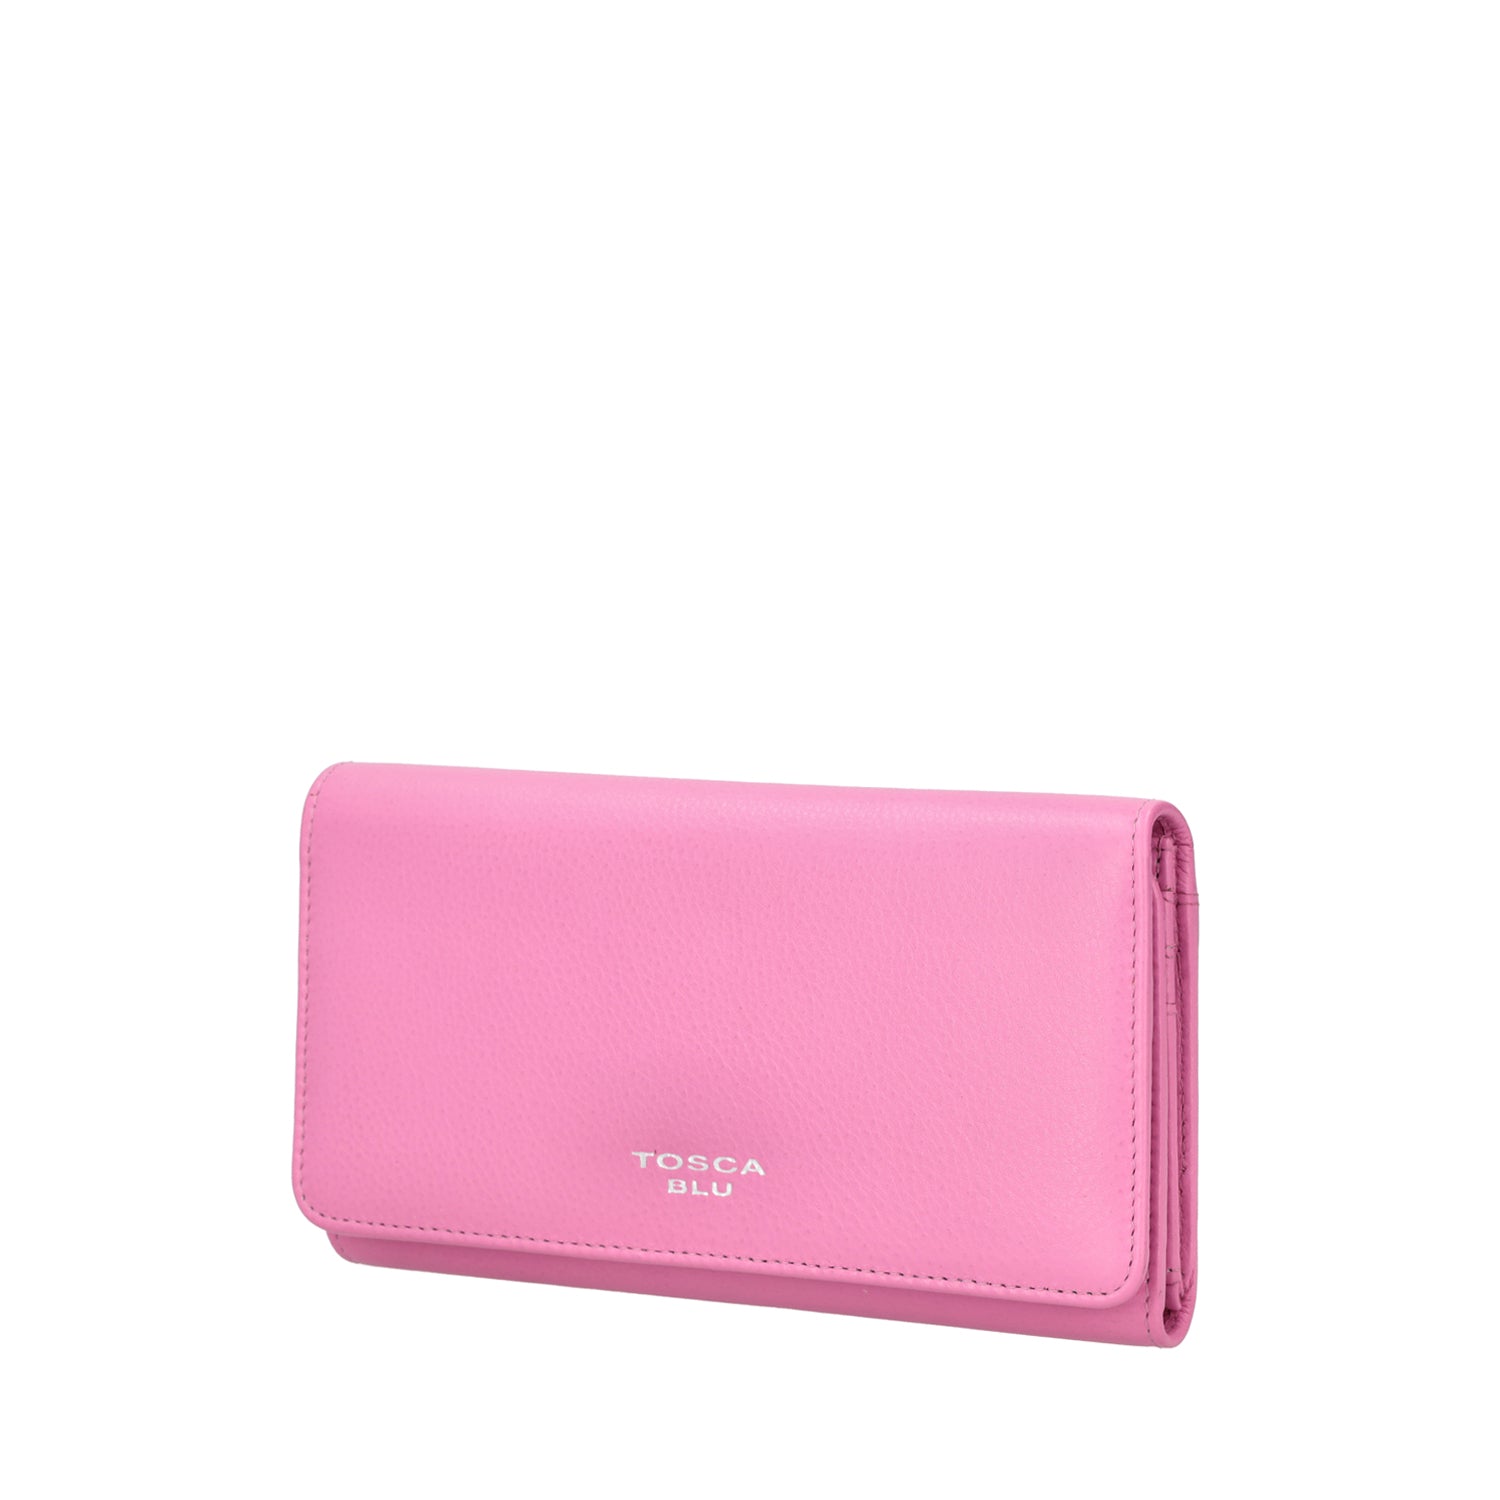 PINK LARGE BASIC WALLETS WALLET WITH FLAP